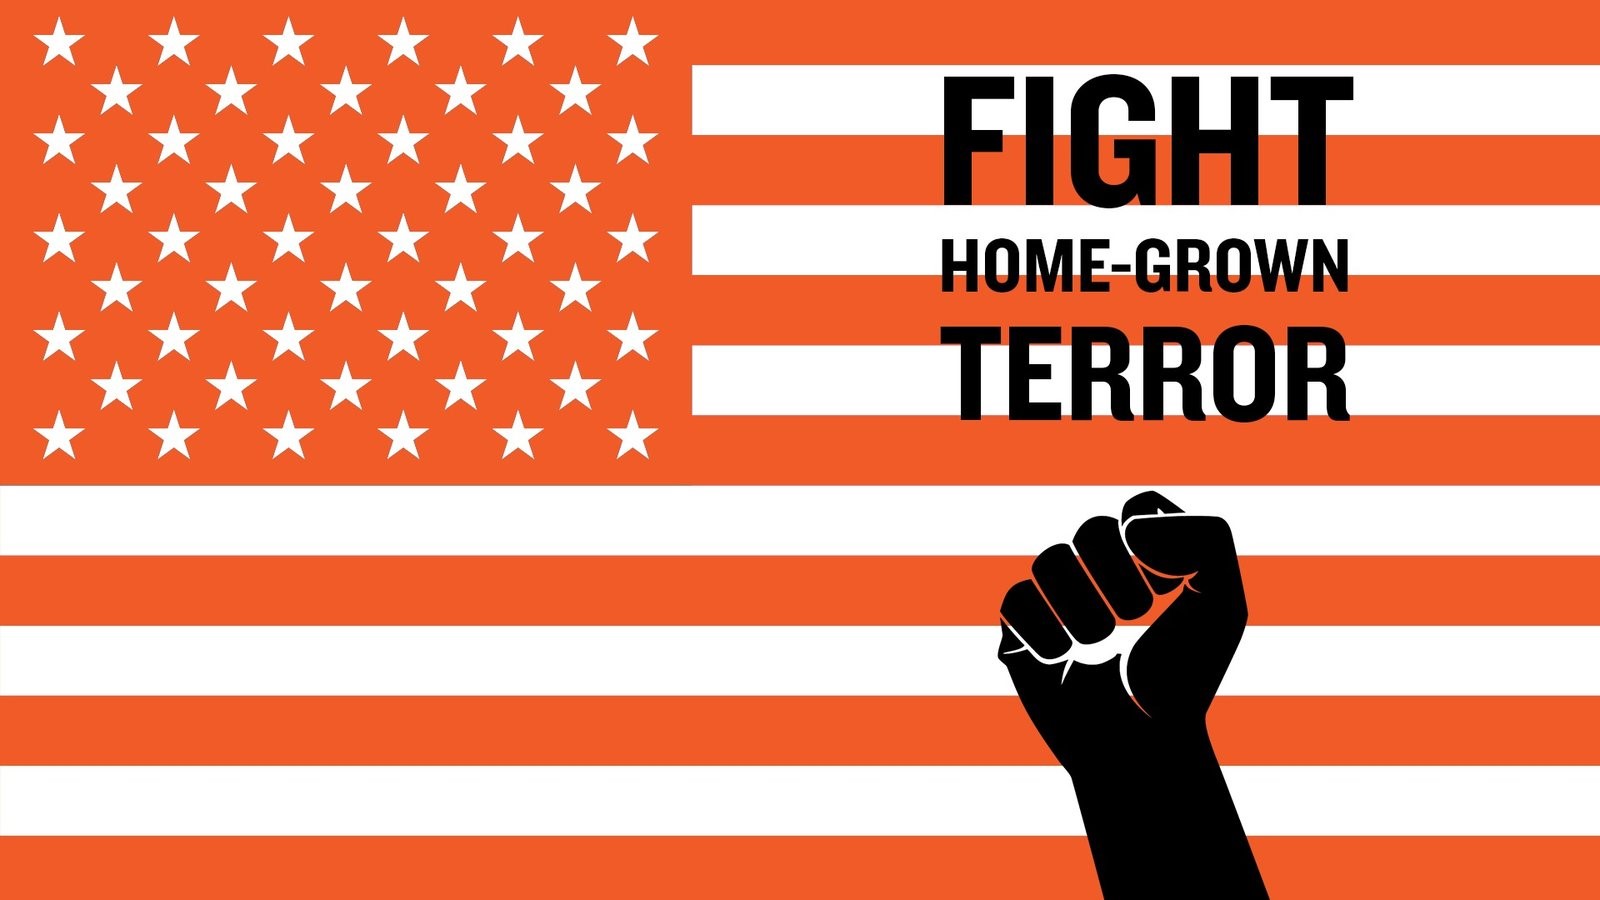 Are many hate crimes really examples of domestic terrorism?